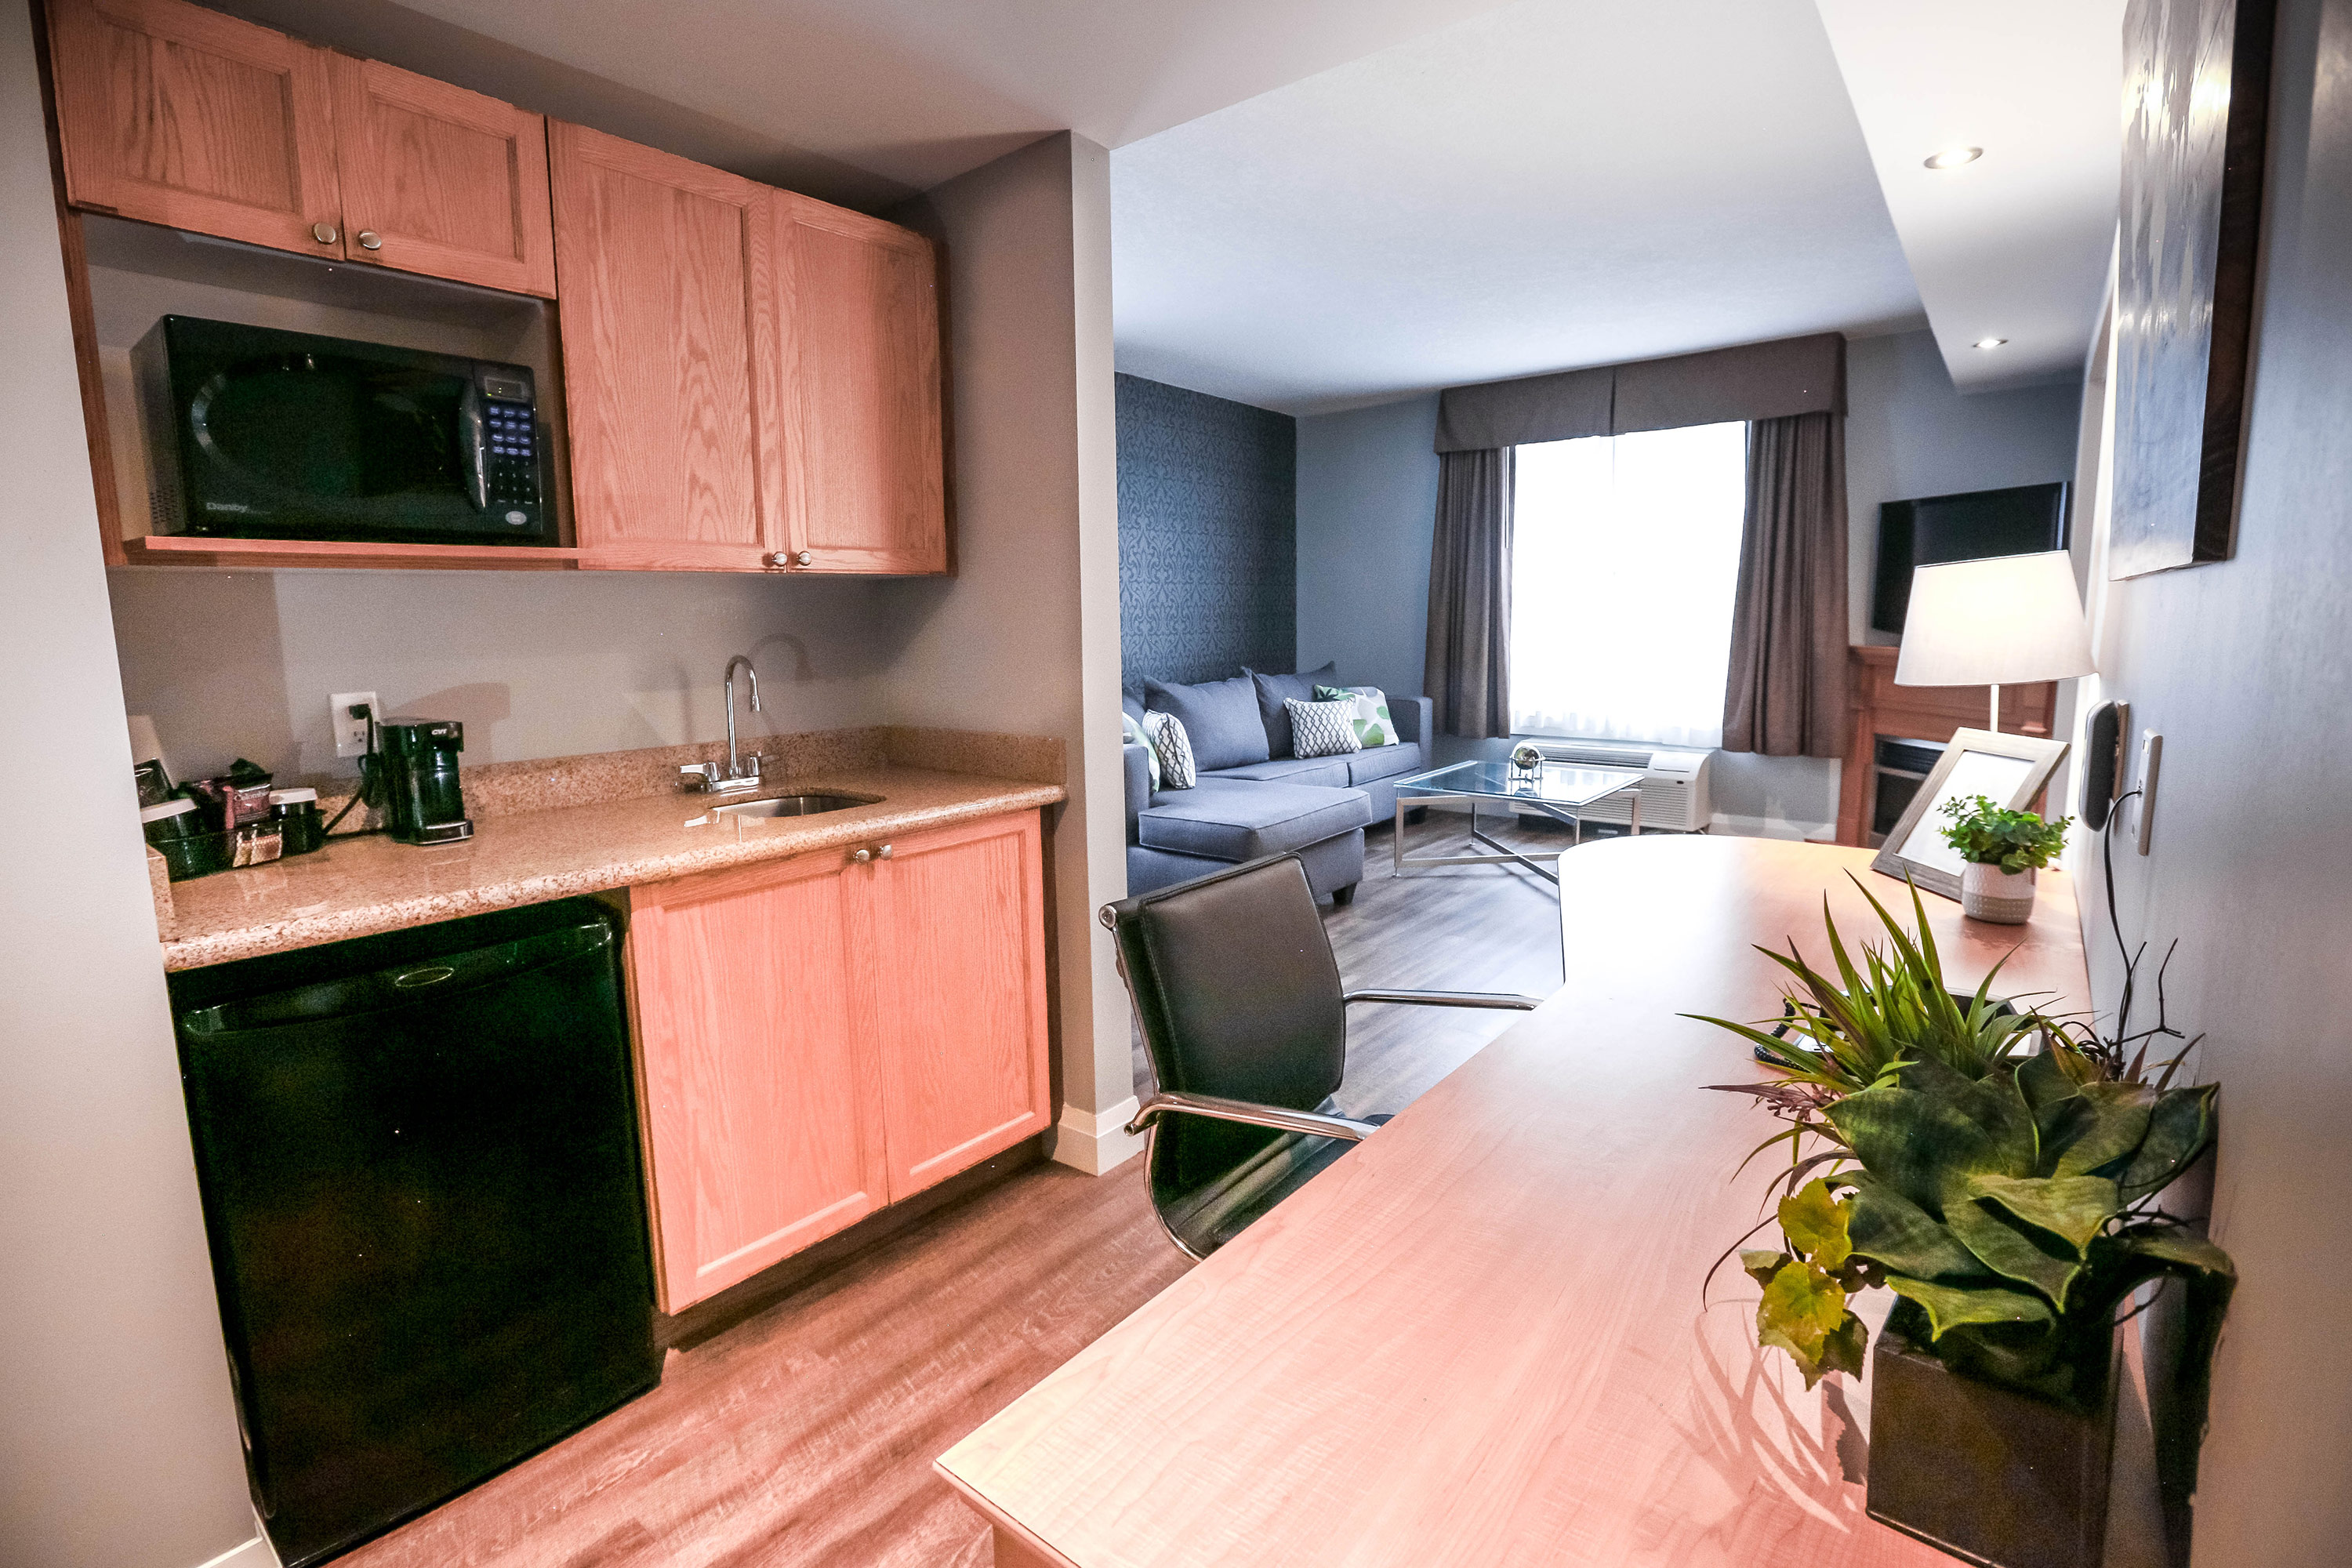 Presidential Suite - Kitchenette with Living Room View